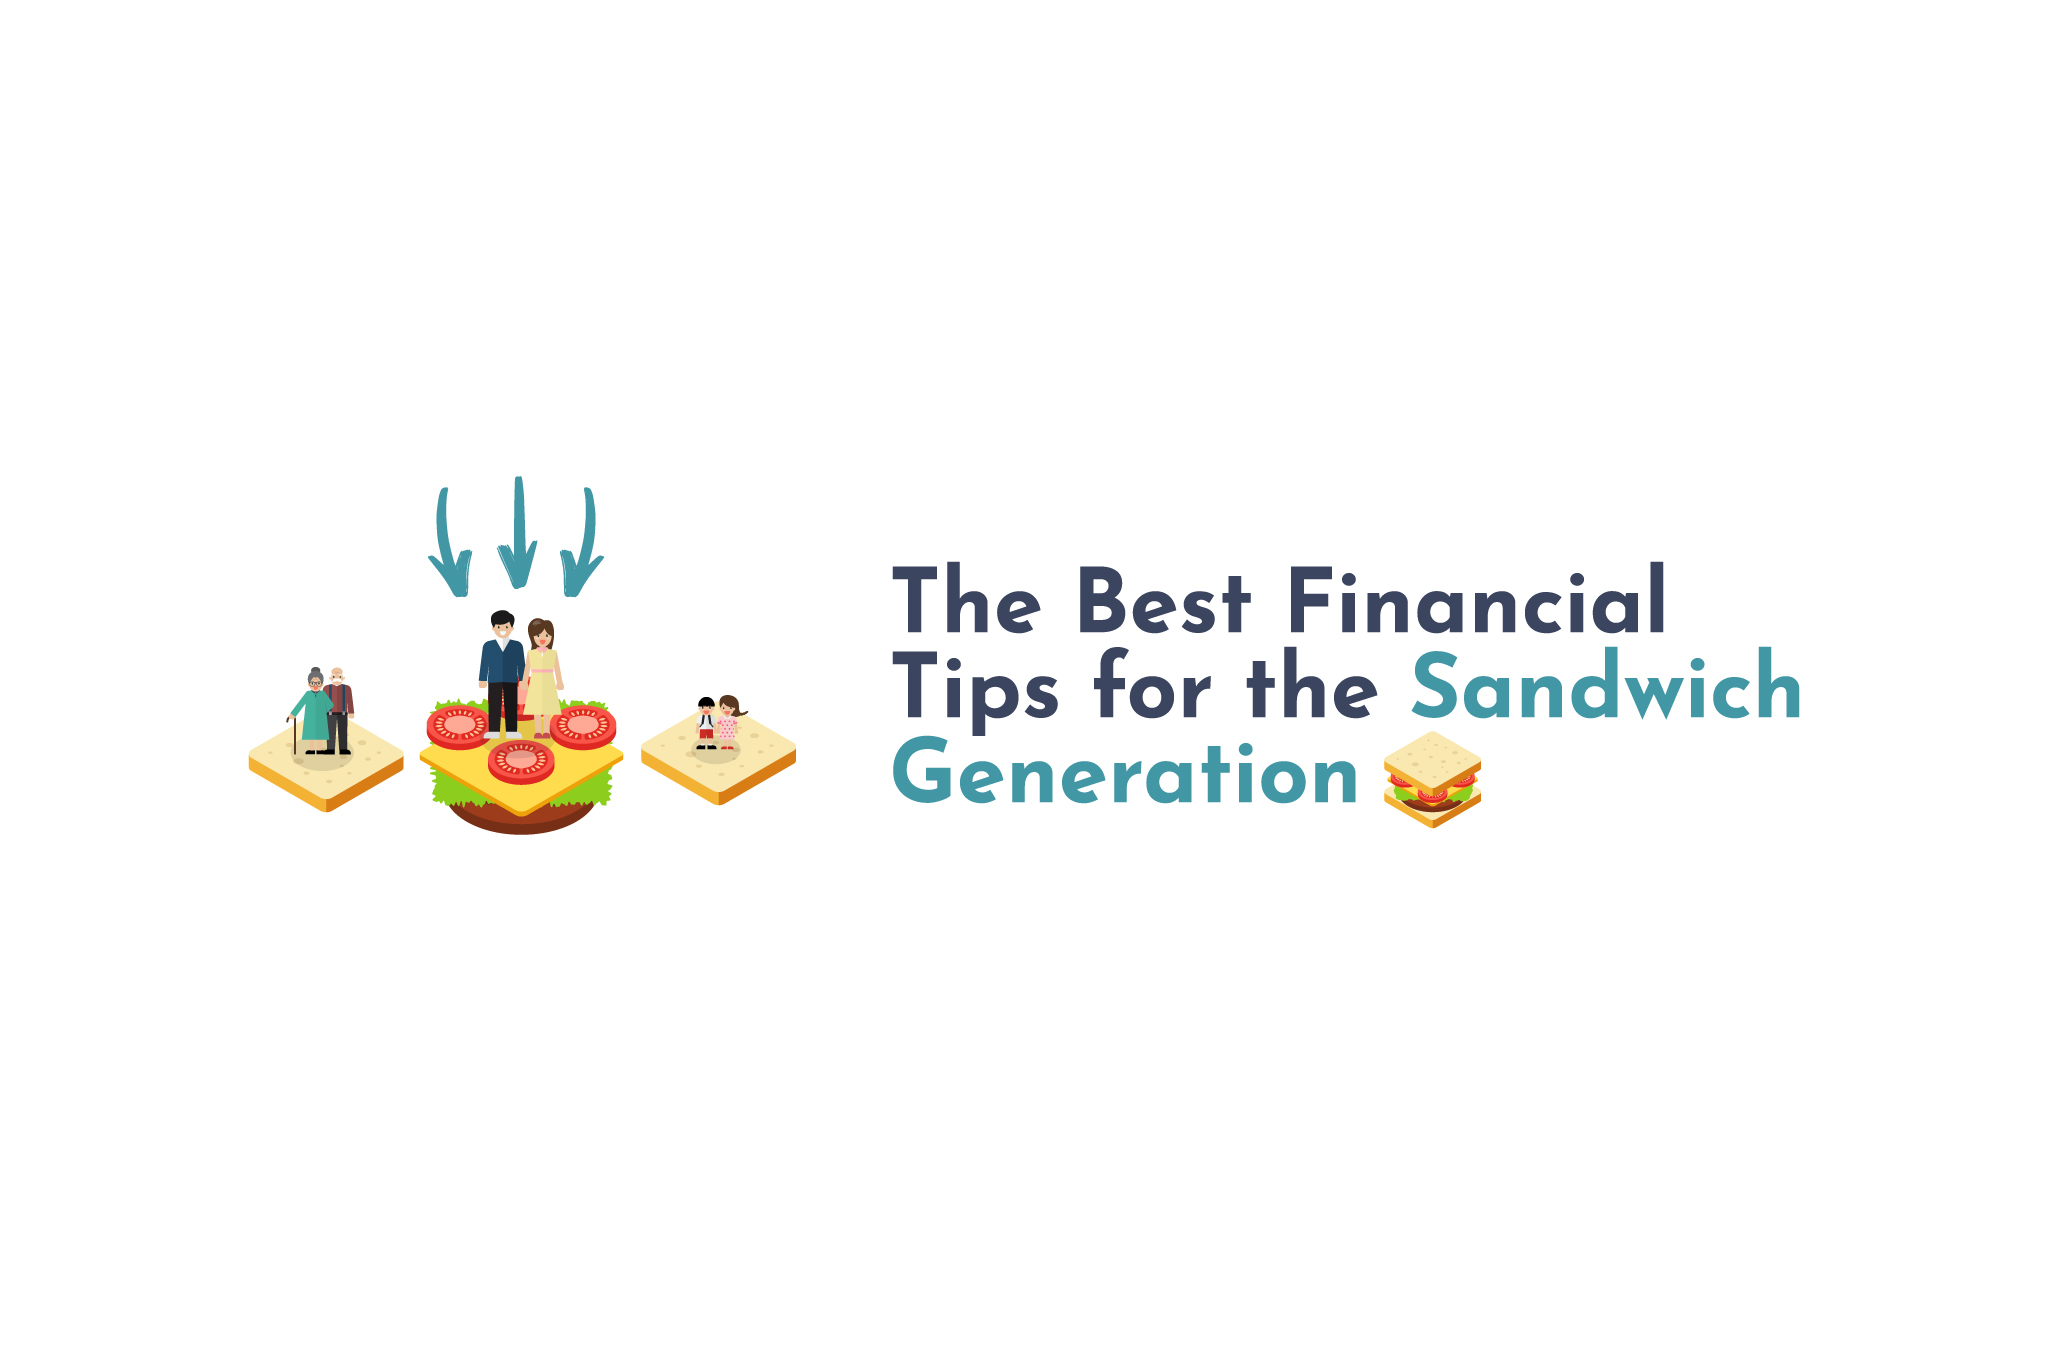 The Best Financial Tips for the Sandwich Generation